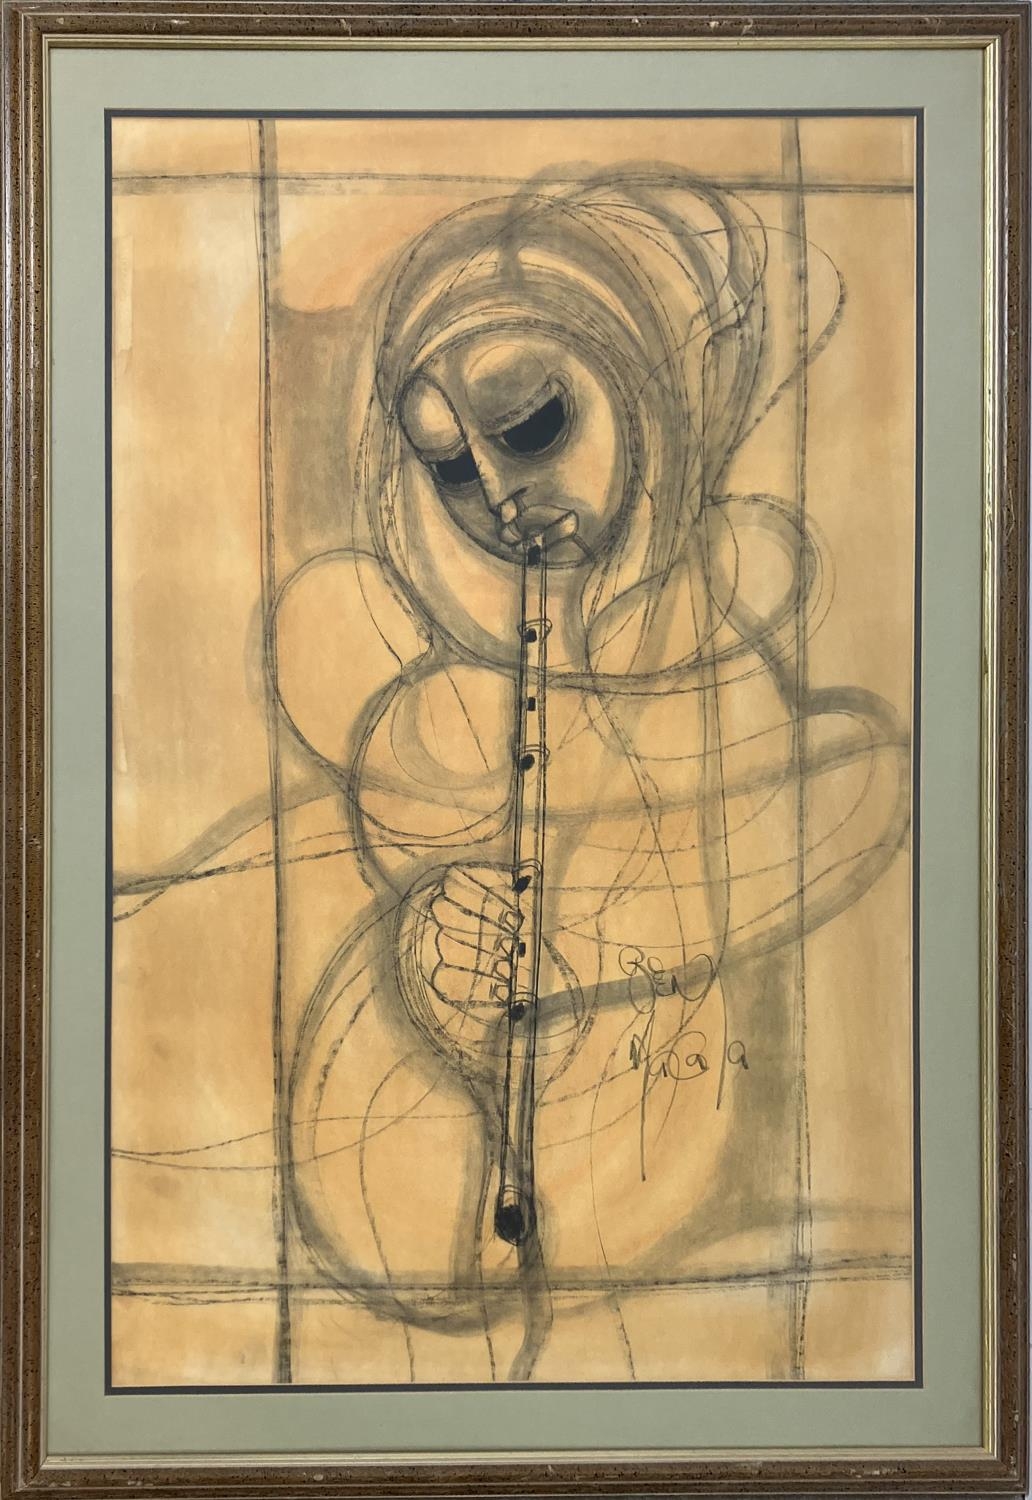 BENJAMIN MZIMKULU MACALA (1937-1997), 'Figure with Flute', charcoal 99cm x 62cm, signed, framed.